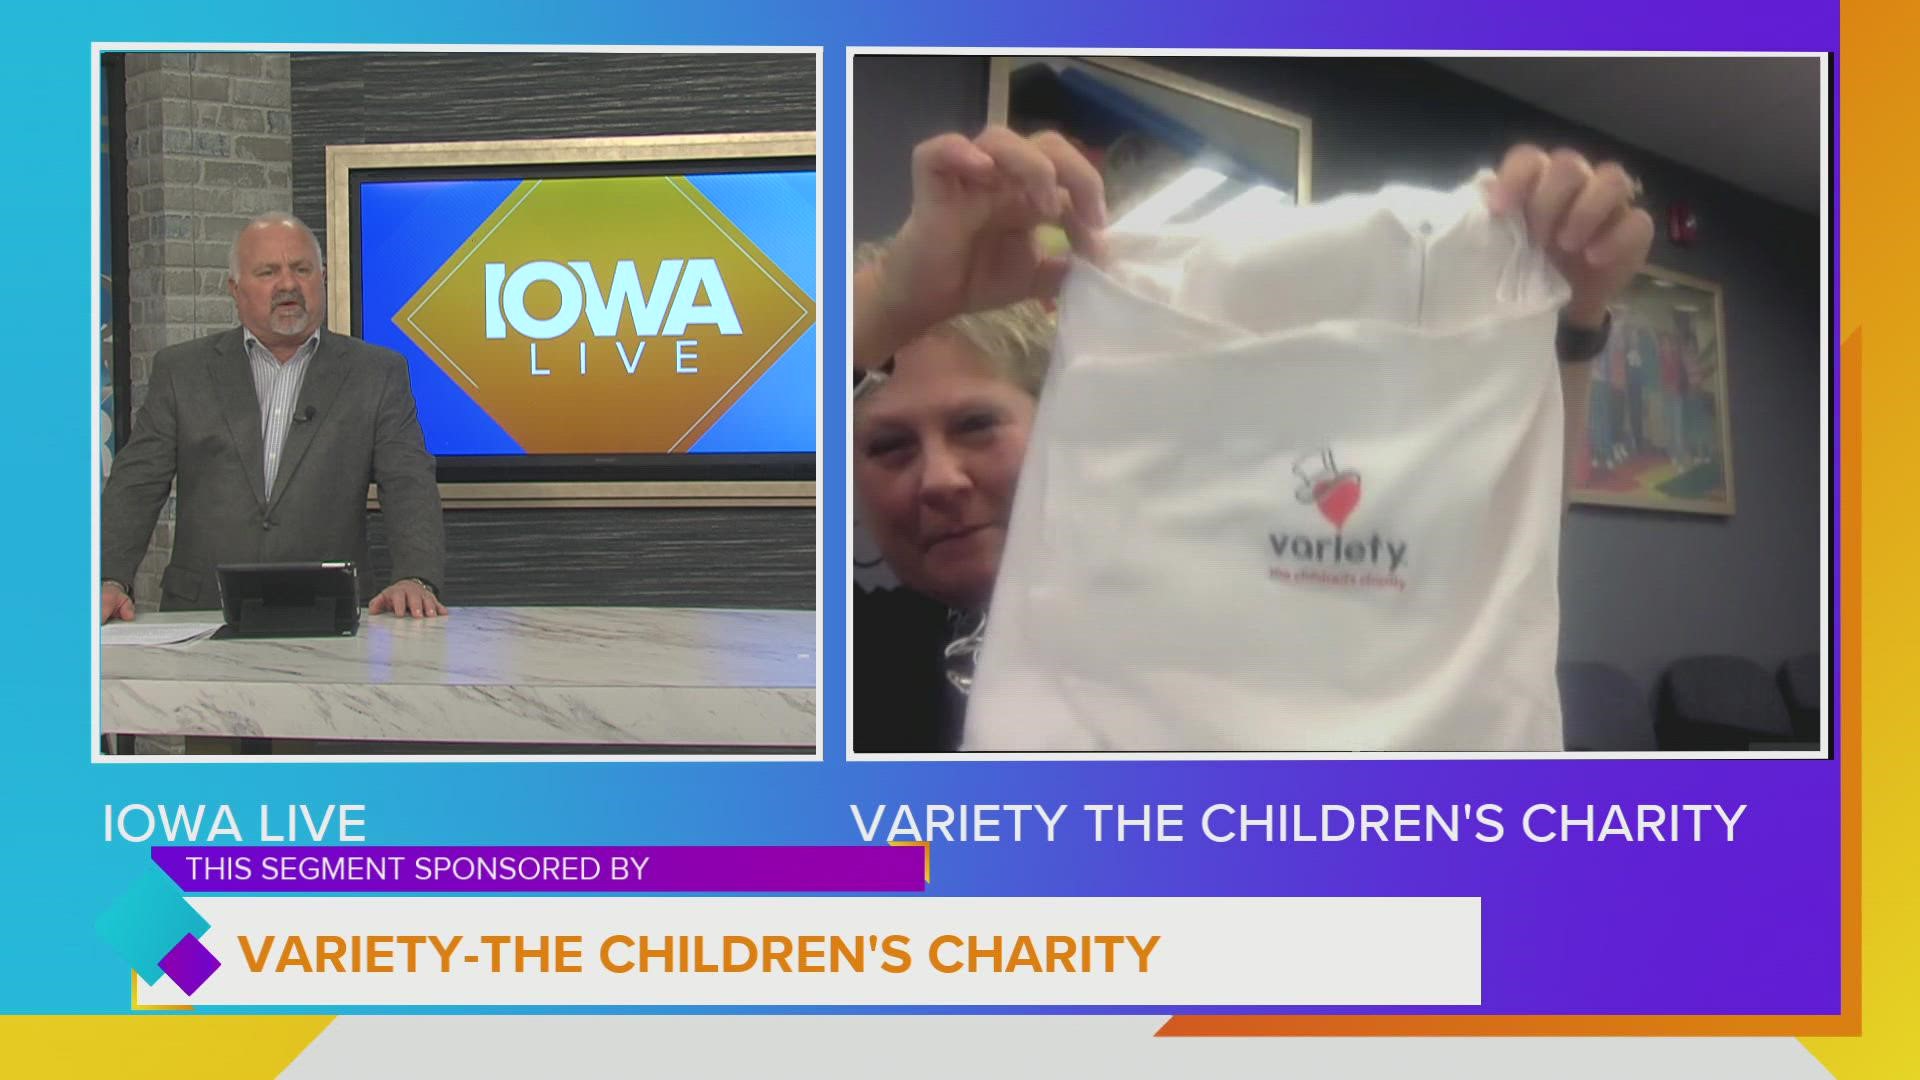 Sheri McMichael, Executive Director of Variety the Children's Charity, is excited about the many programs they are involved with including the NEW INFANT SLEEP SACKS